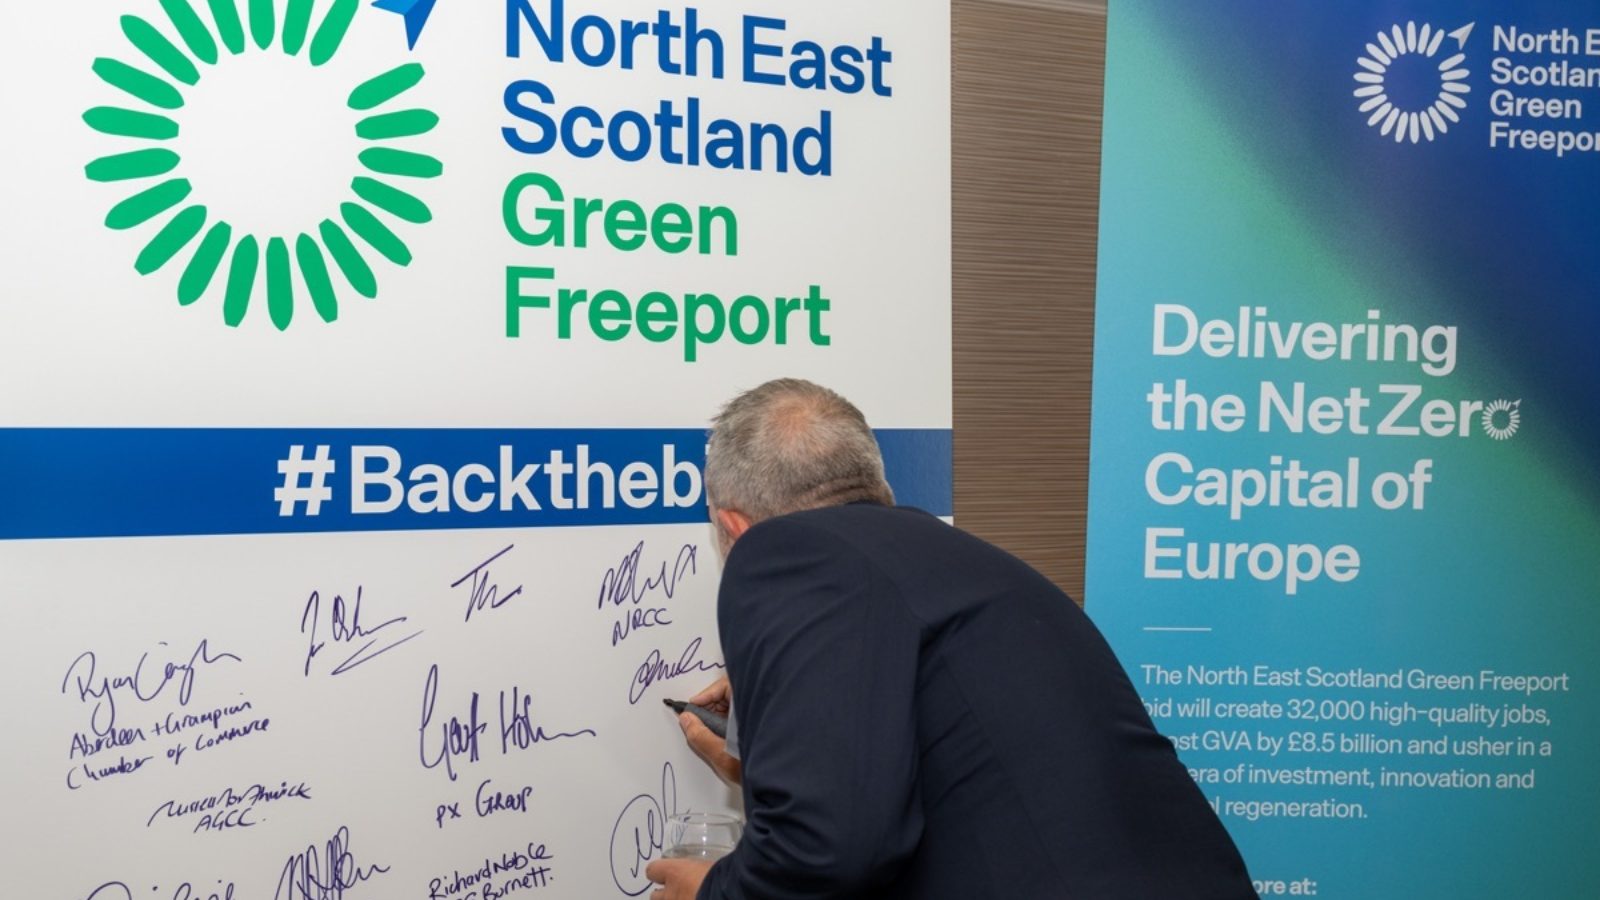 Guests show their support for the region's green freeport bid